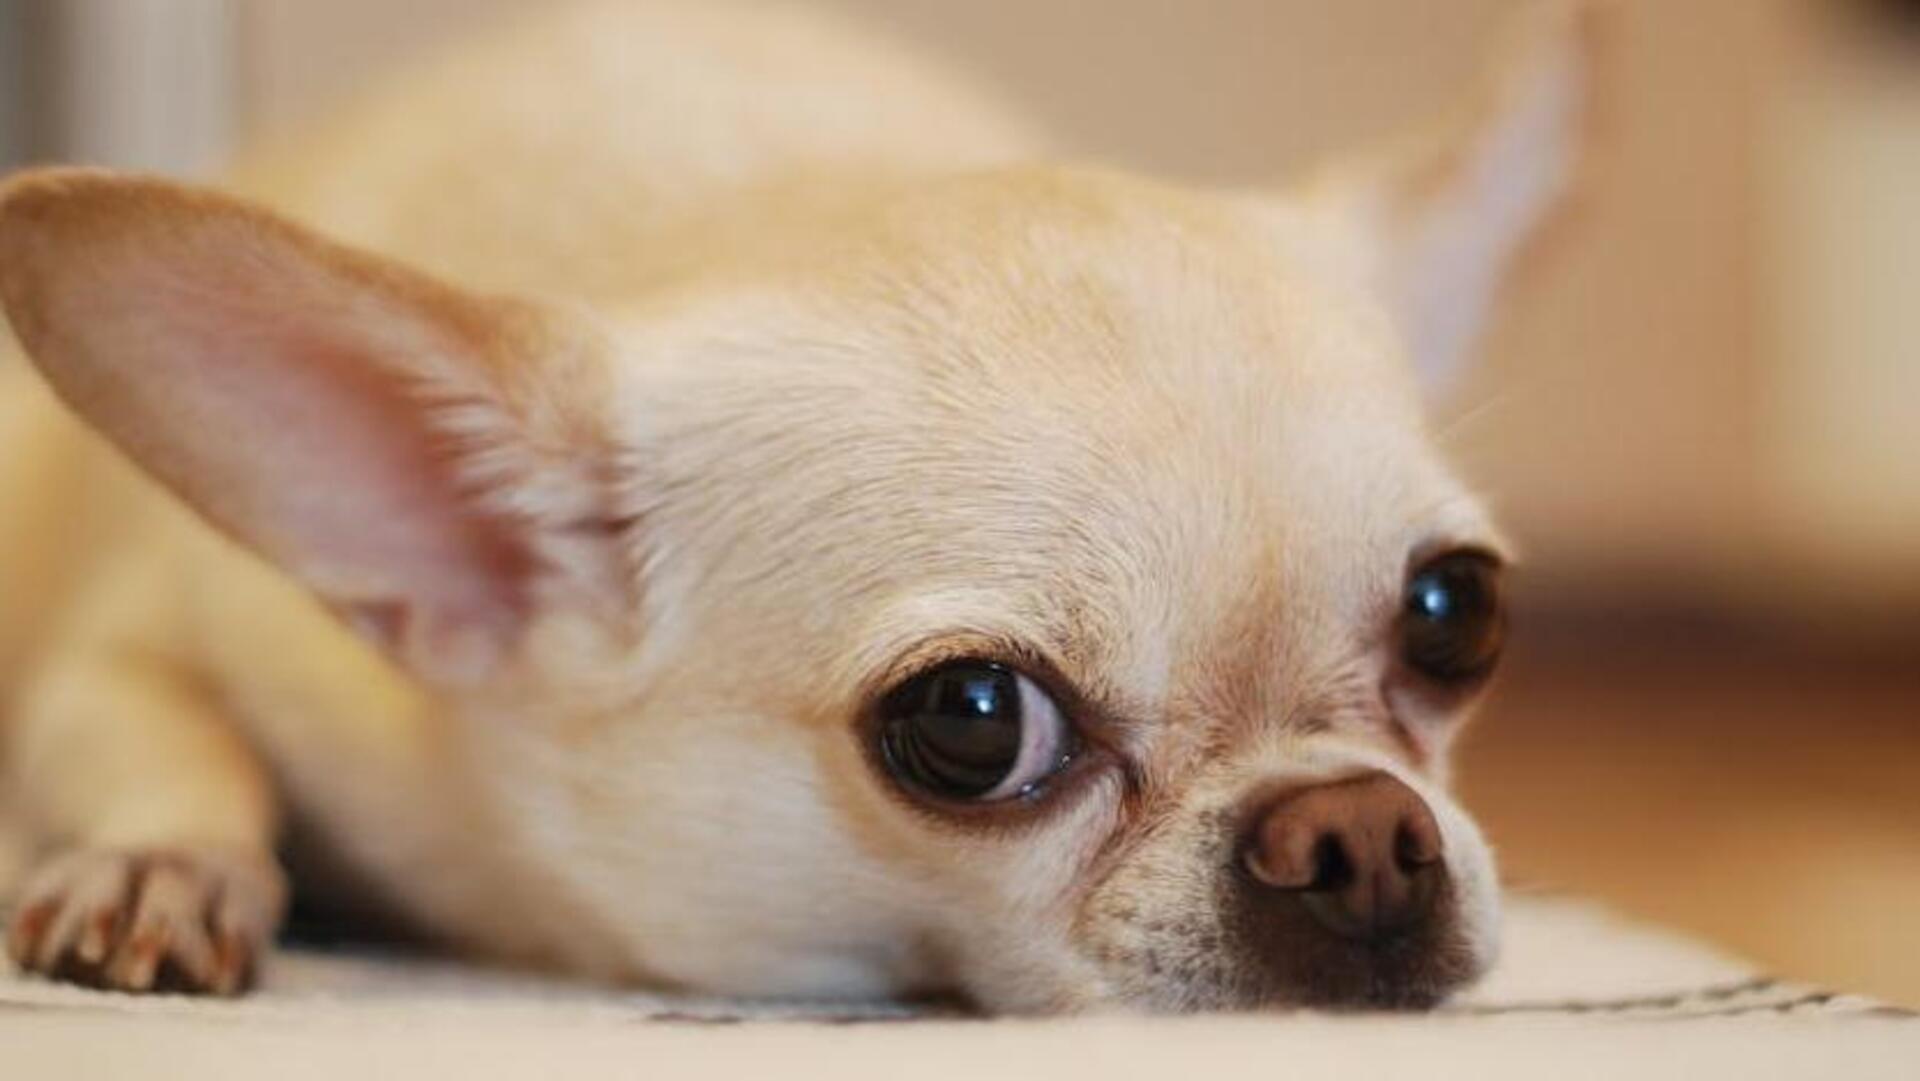 How to take care of your Chihuahua during cold weather